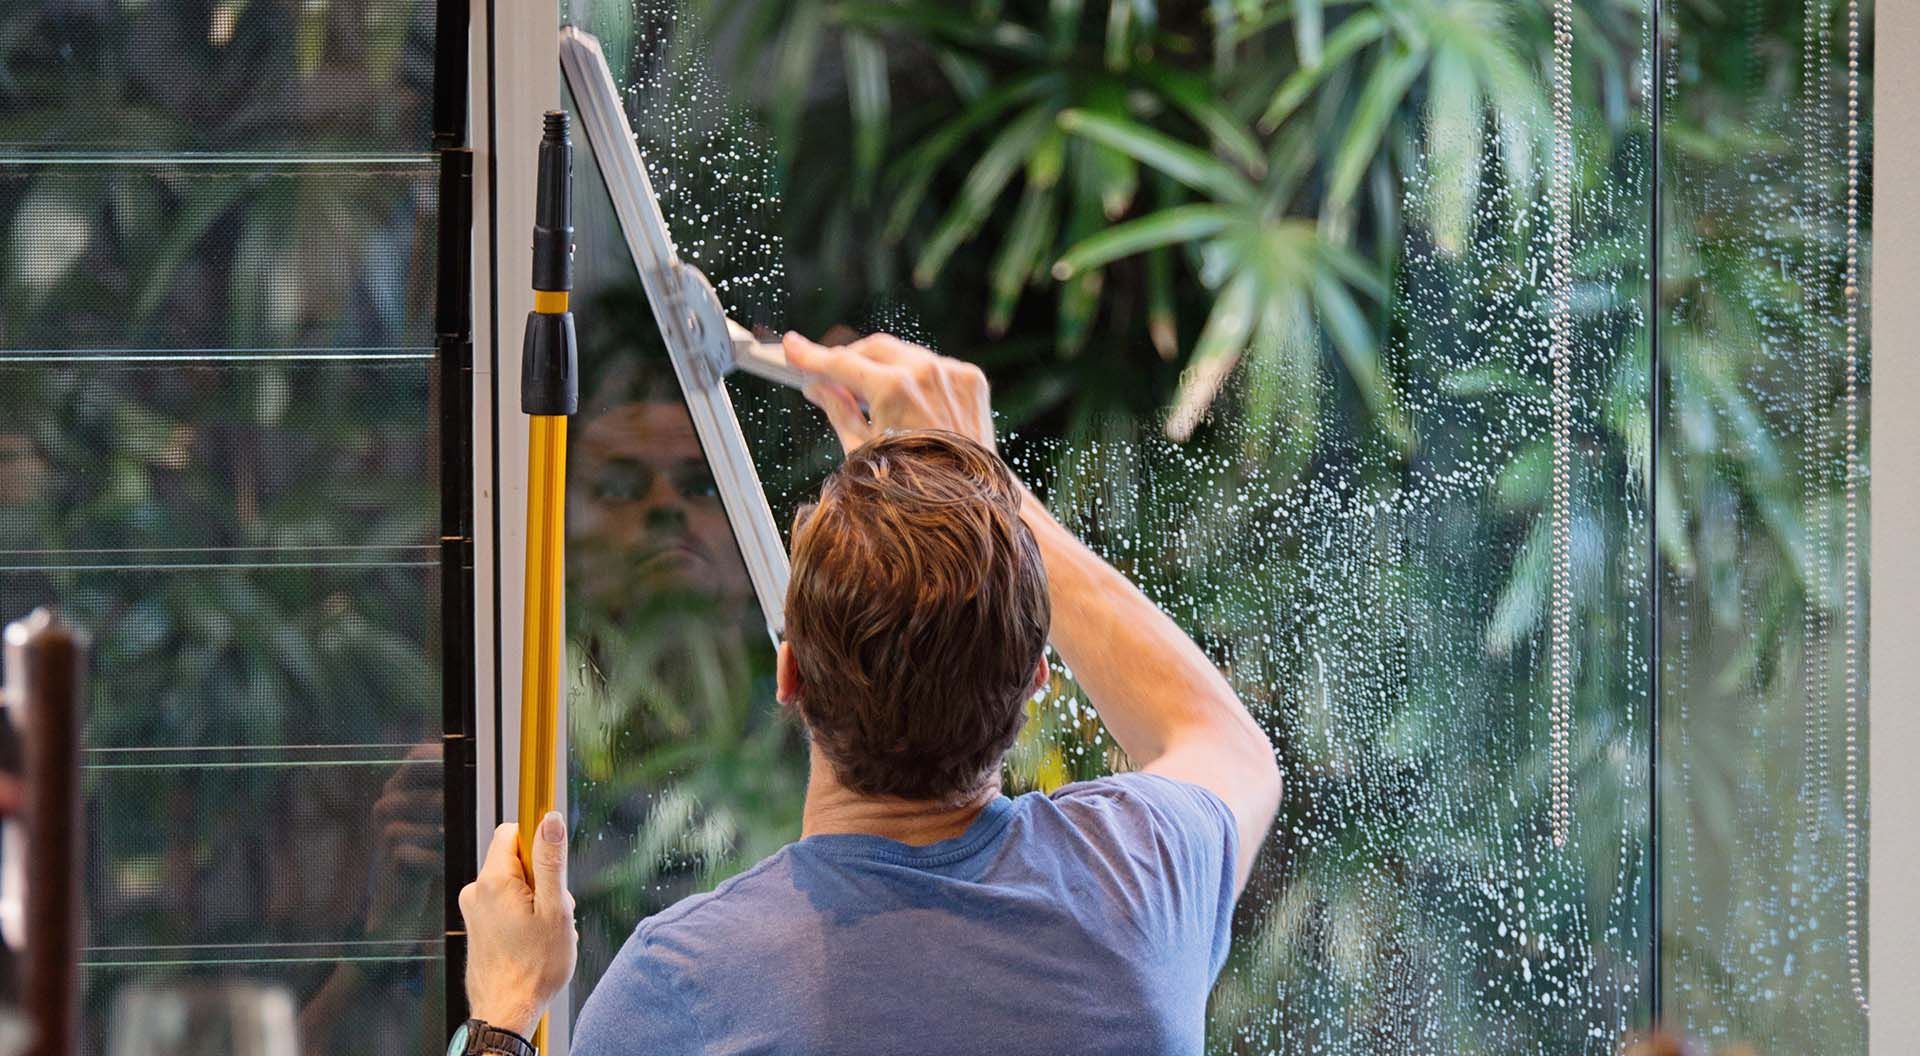 Window Cleaning Professional